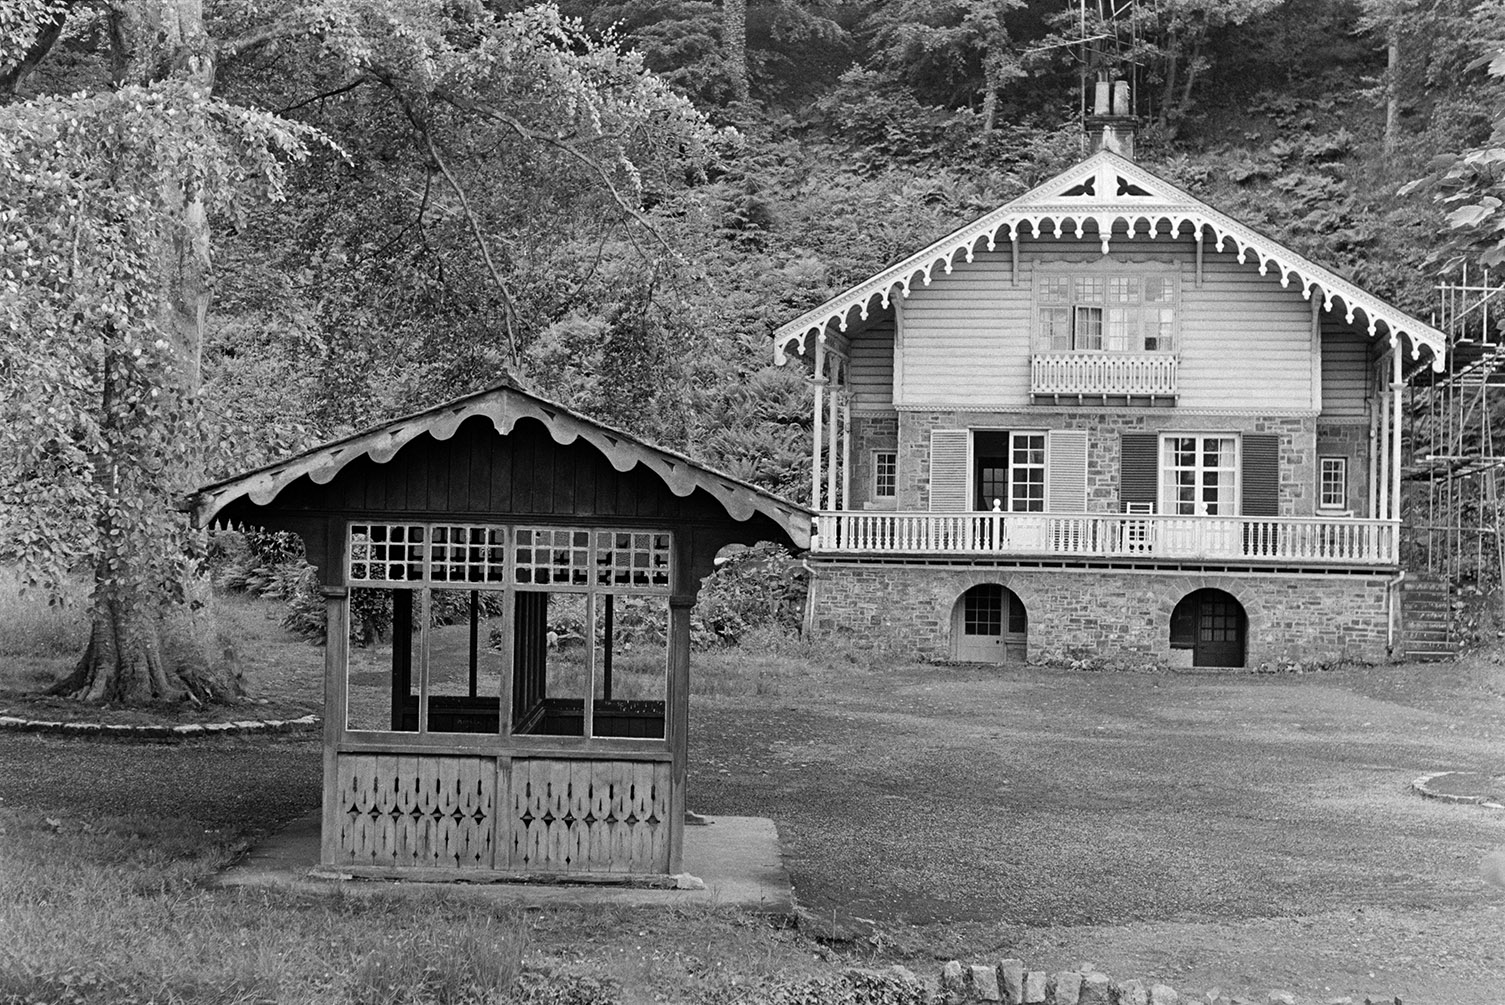 An alpine cottage at Simmons Park, Okehampton. A bench with a canopy is in the foreground and the cottage is surrounded by trees.